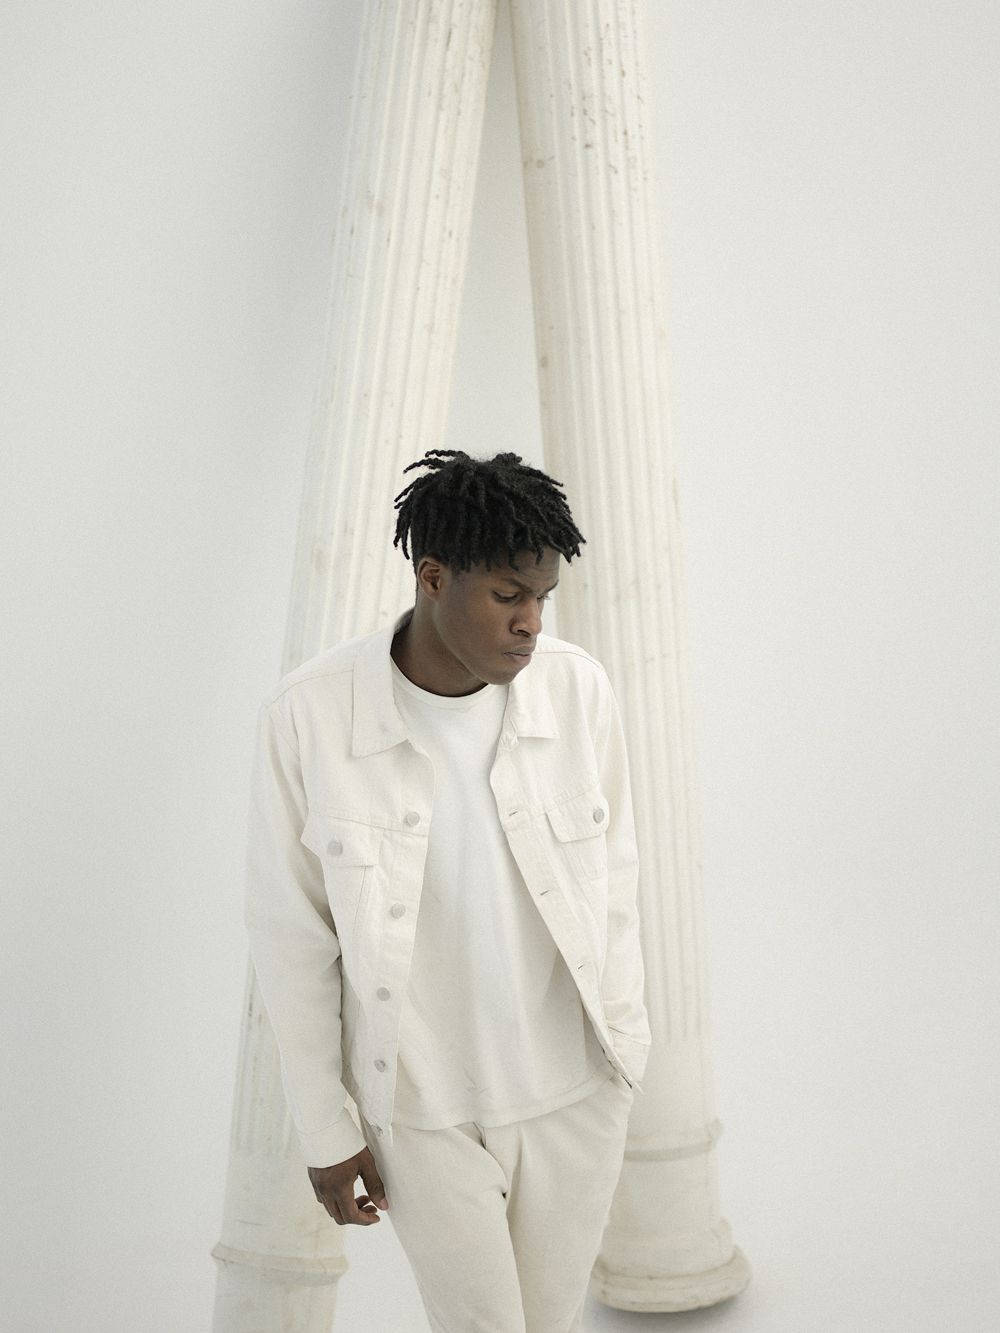 Daniel Caesar All-white Outfit Background